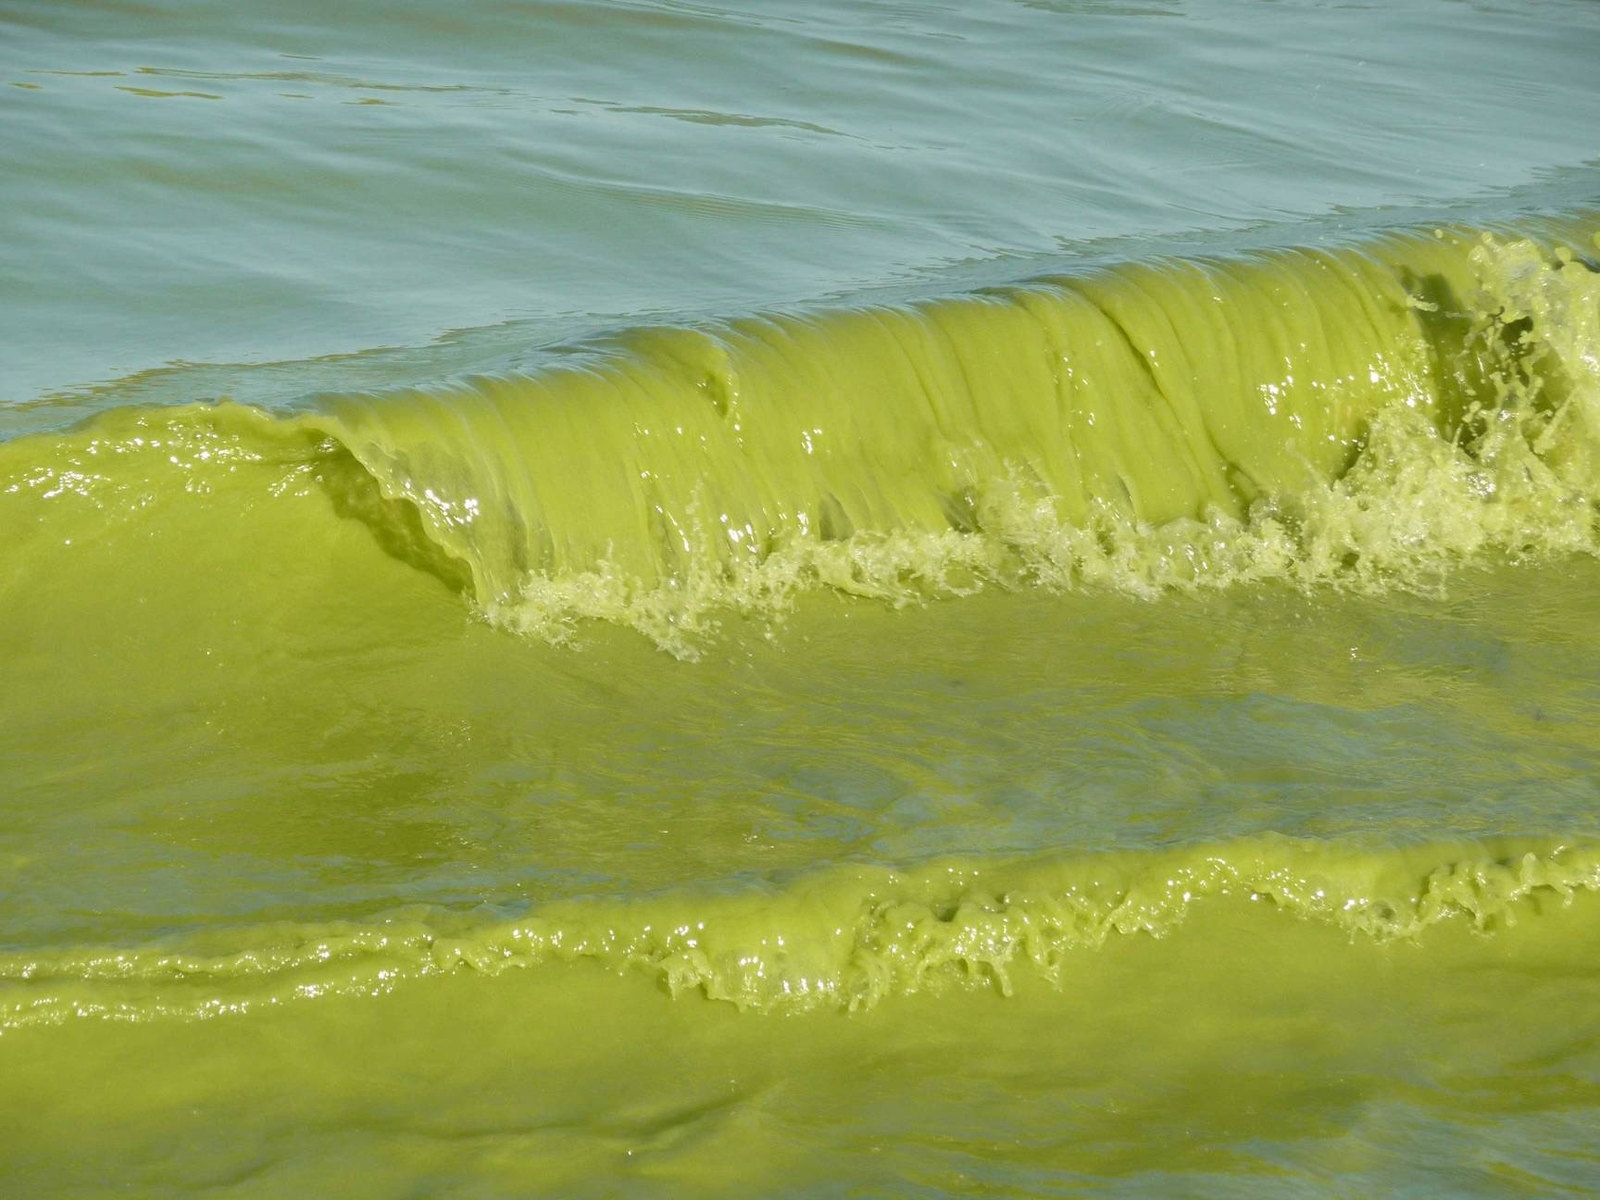 Harmful algal bloom in Lake Erie, Sept. 4, 2009. Image by NOAA/Flickr. United States, 2009.